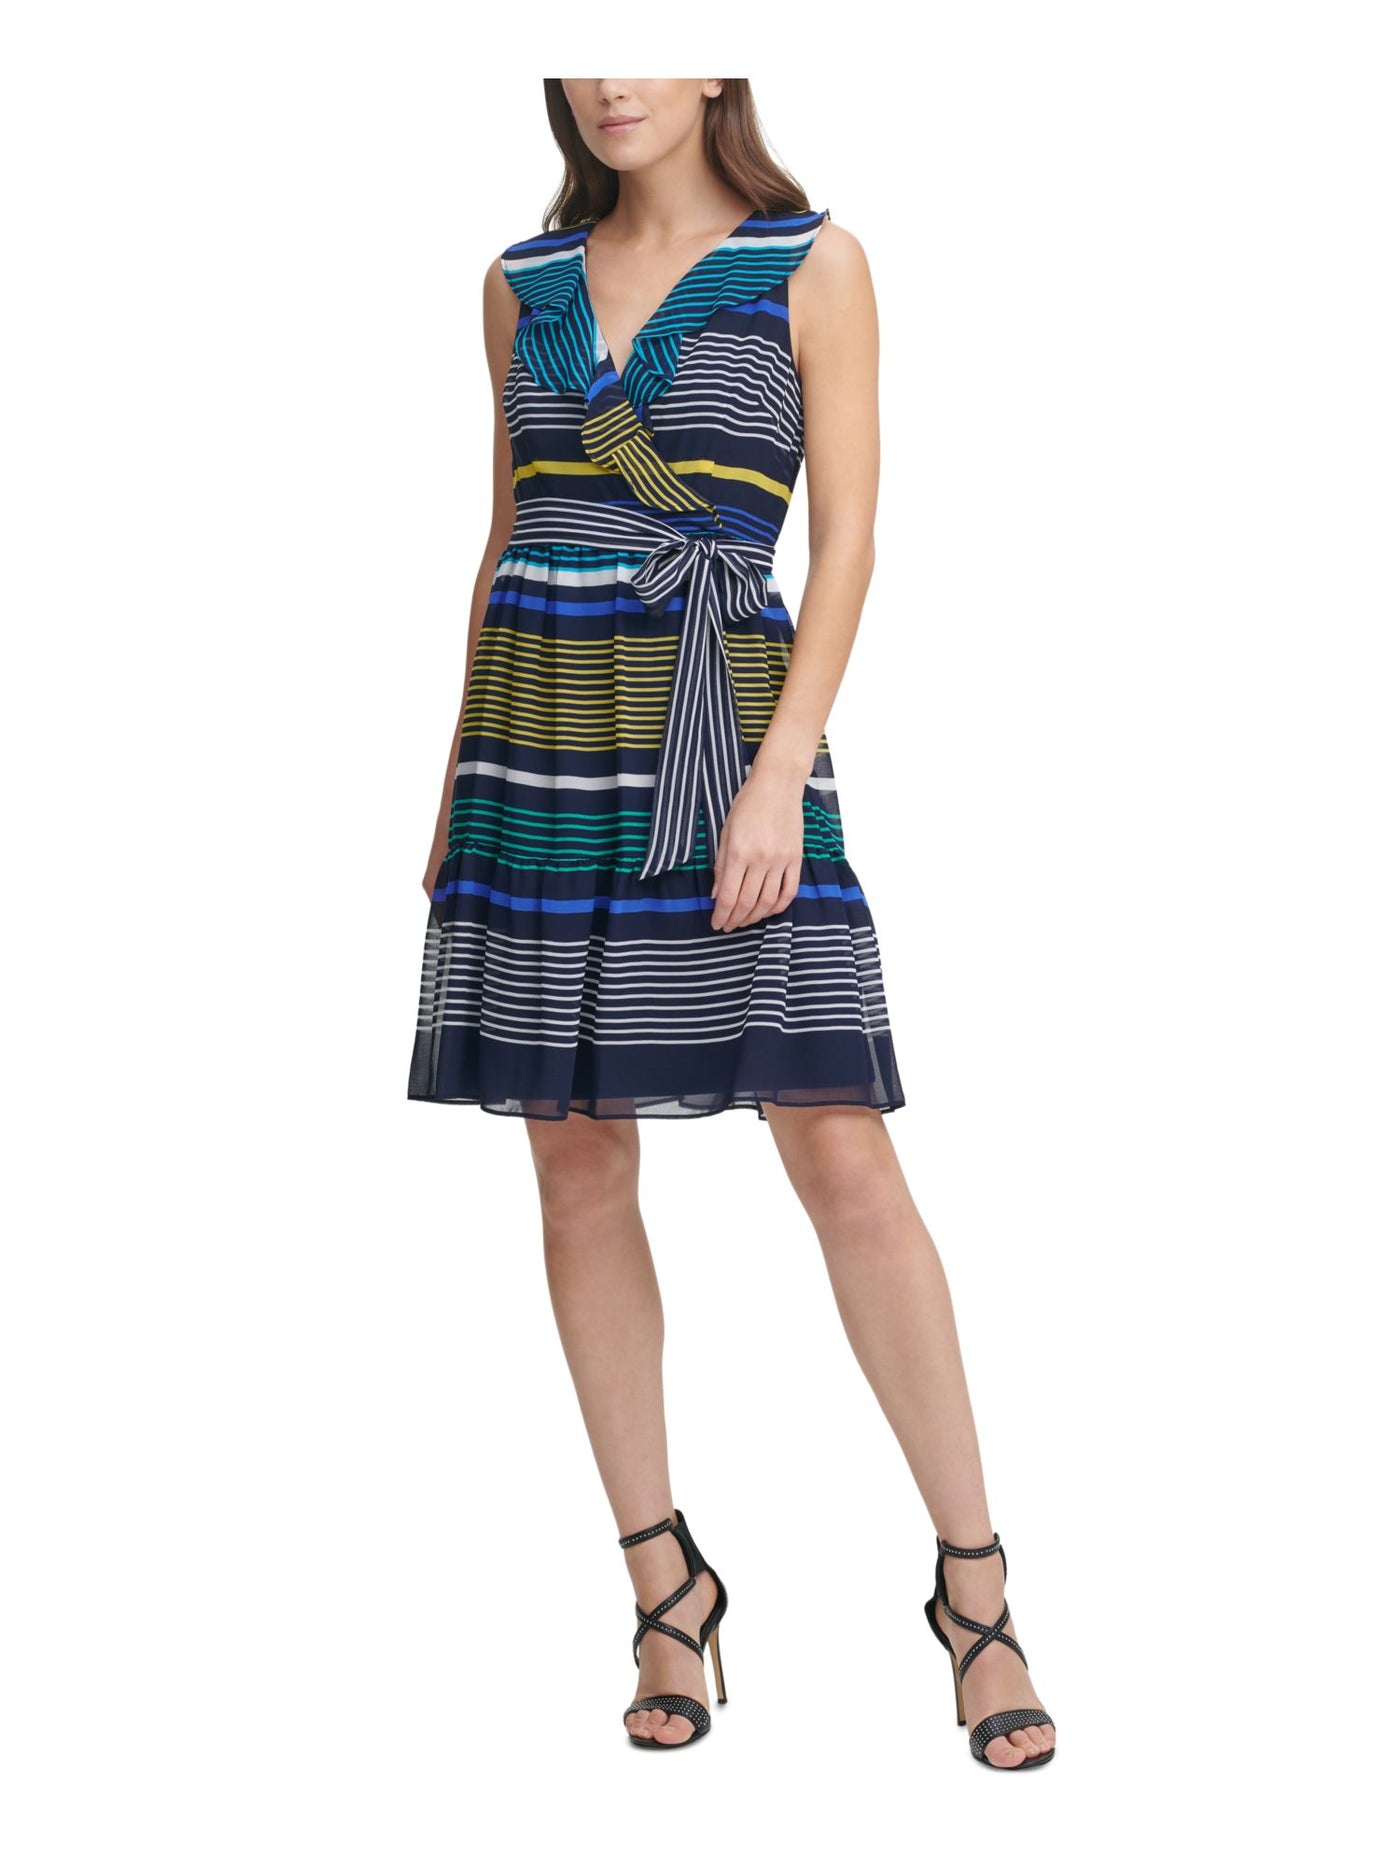 DKNY Womens Navy Ruffled Zippered Belted Lined Striped Sleeveless Surplice Neckline Above The Knee Wear To Work Fit + Flare Dress 10